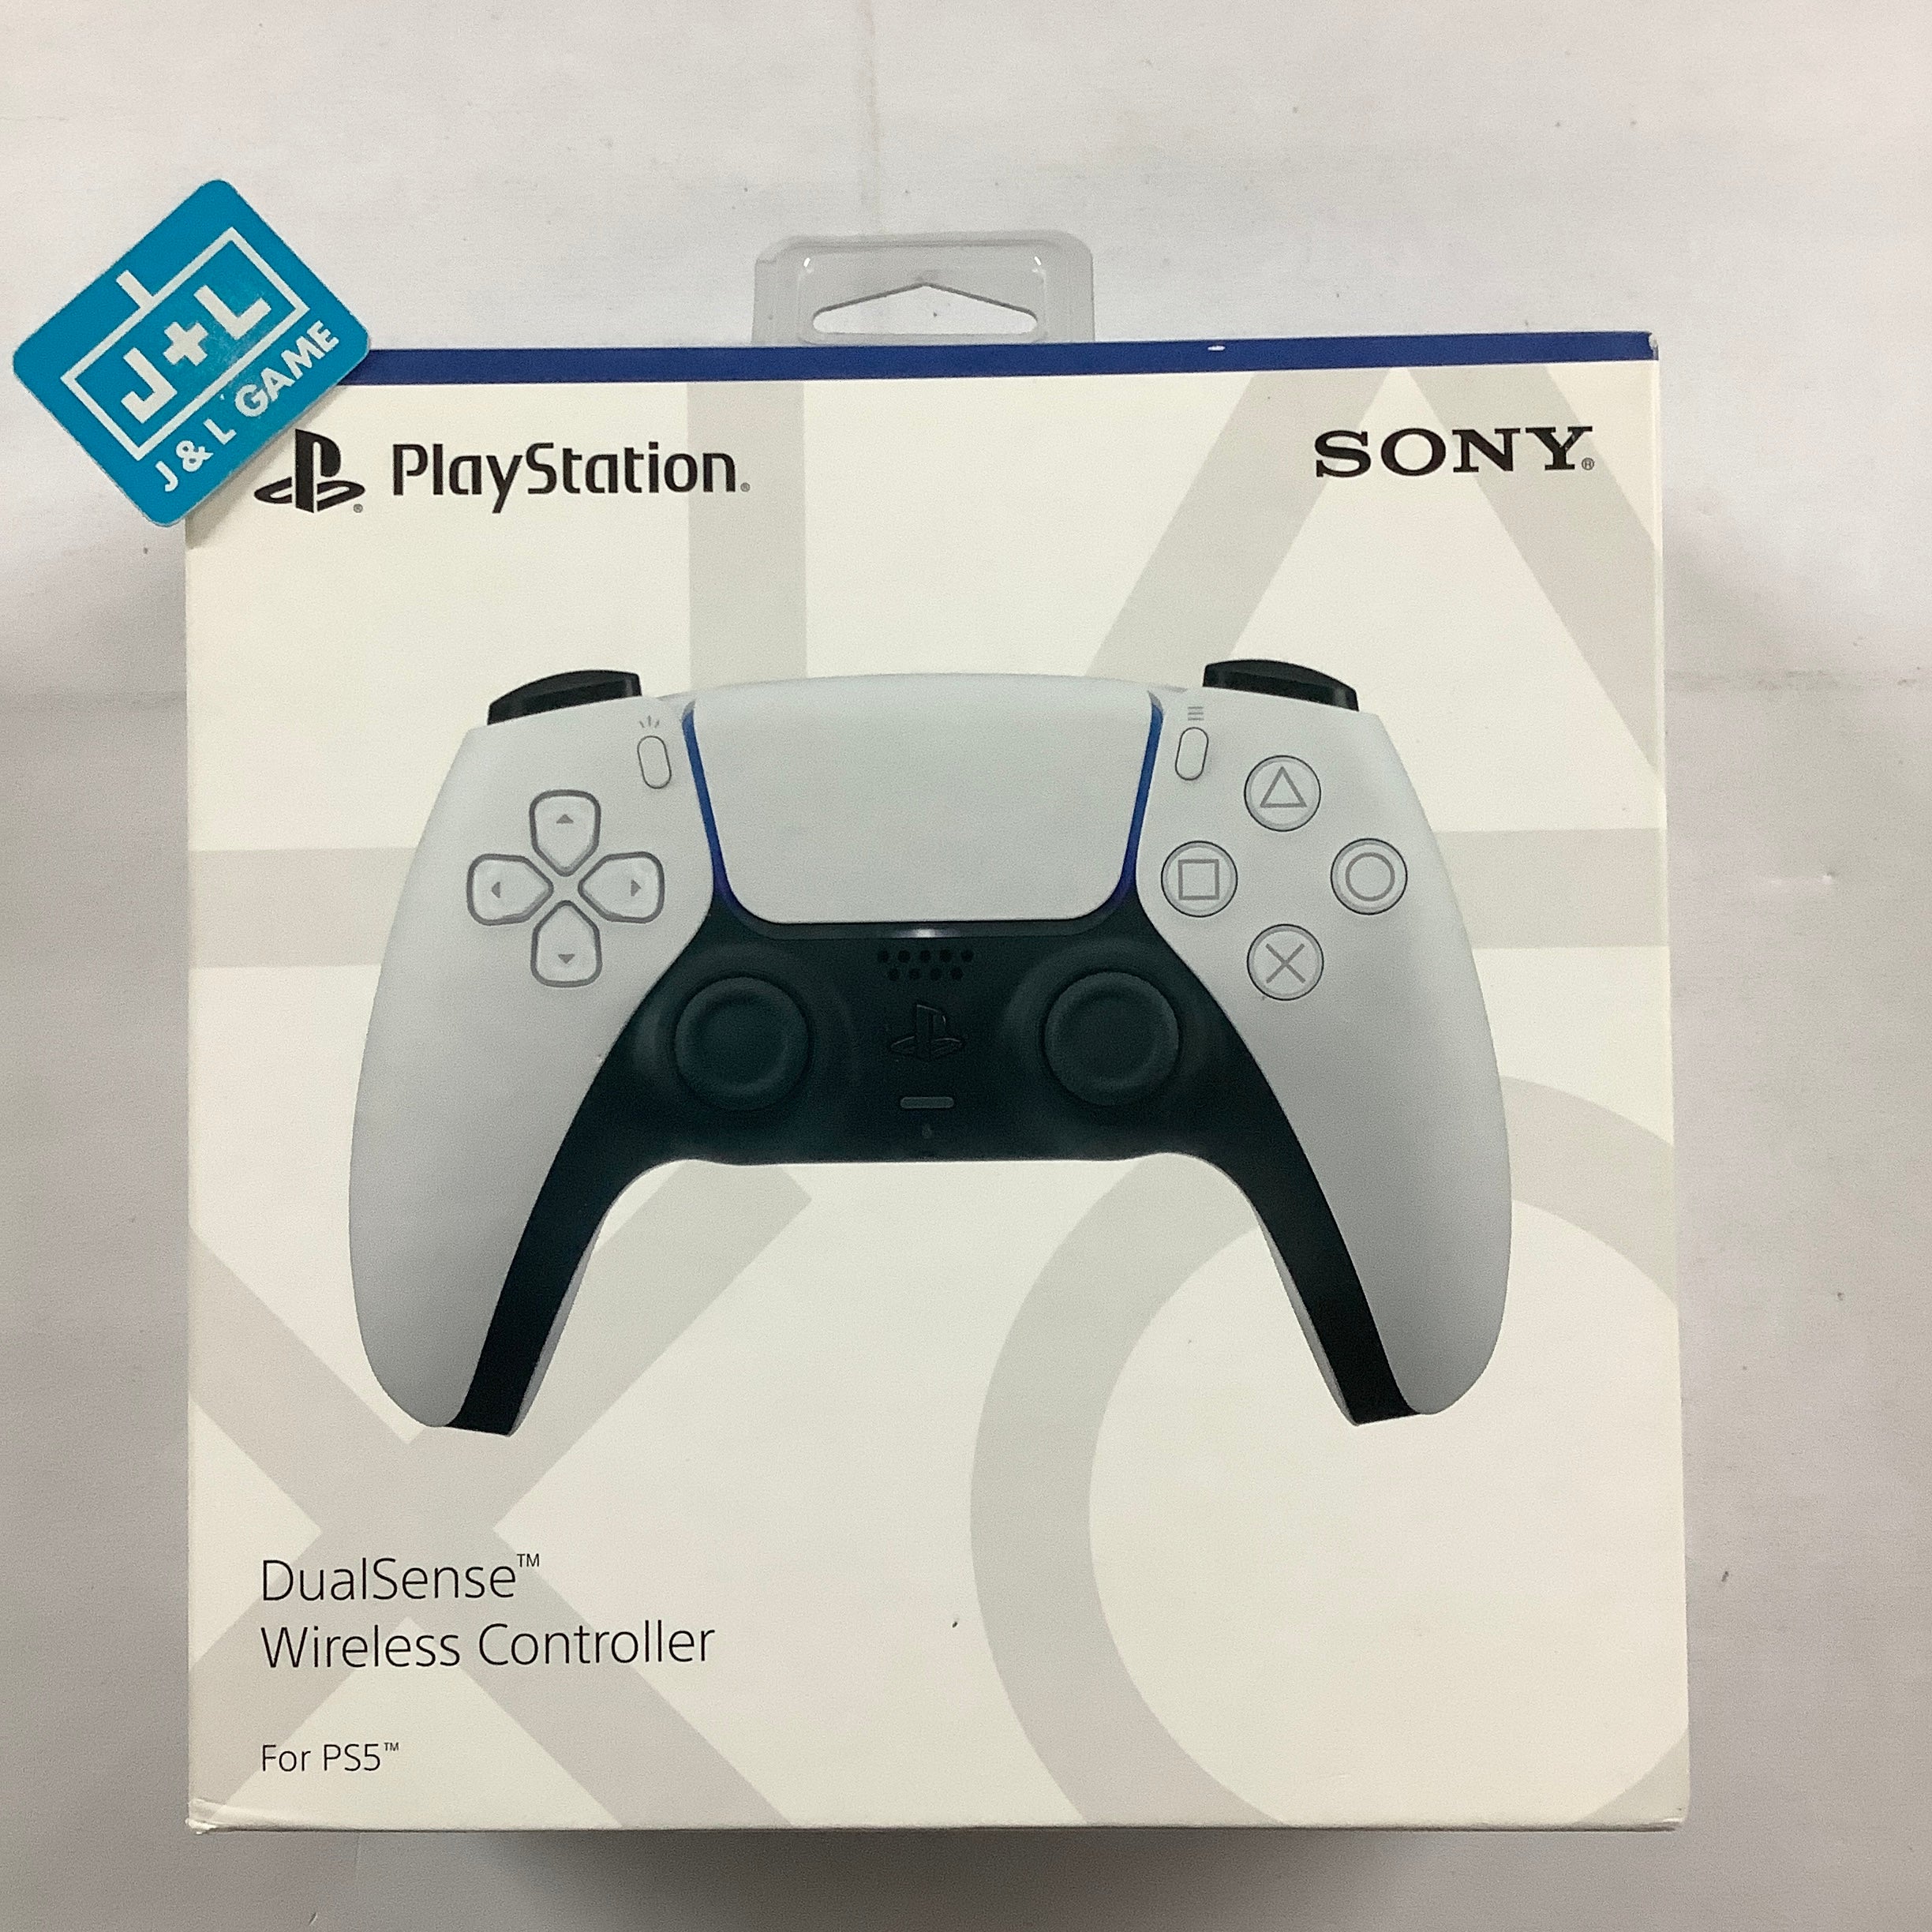 SONY PlayStation 5 DualSense Wireless Controller (White) - (PS5)  PlayStation 5